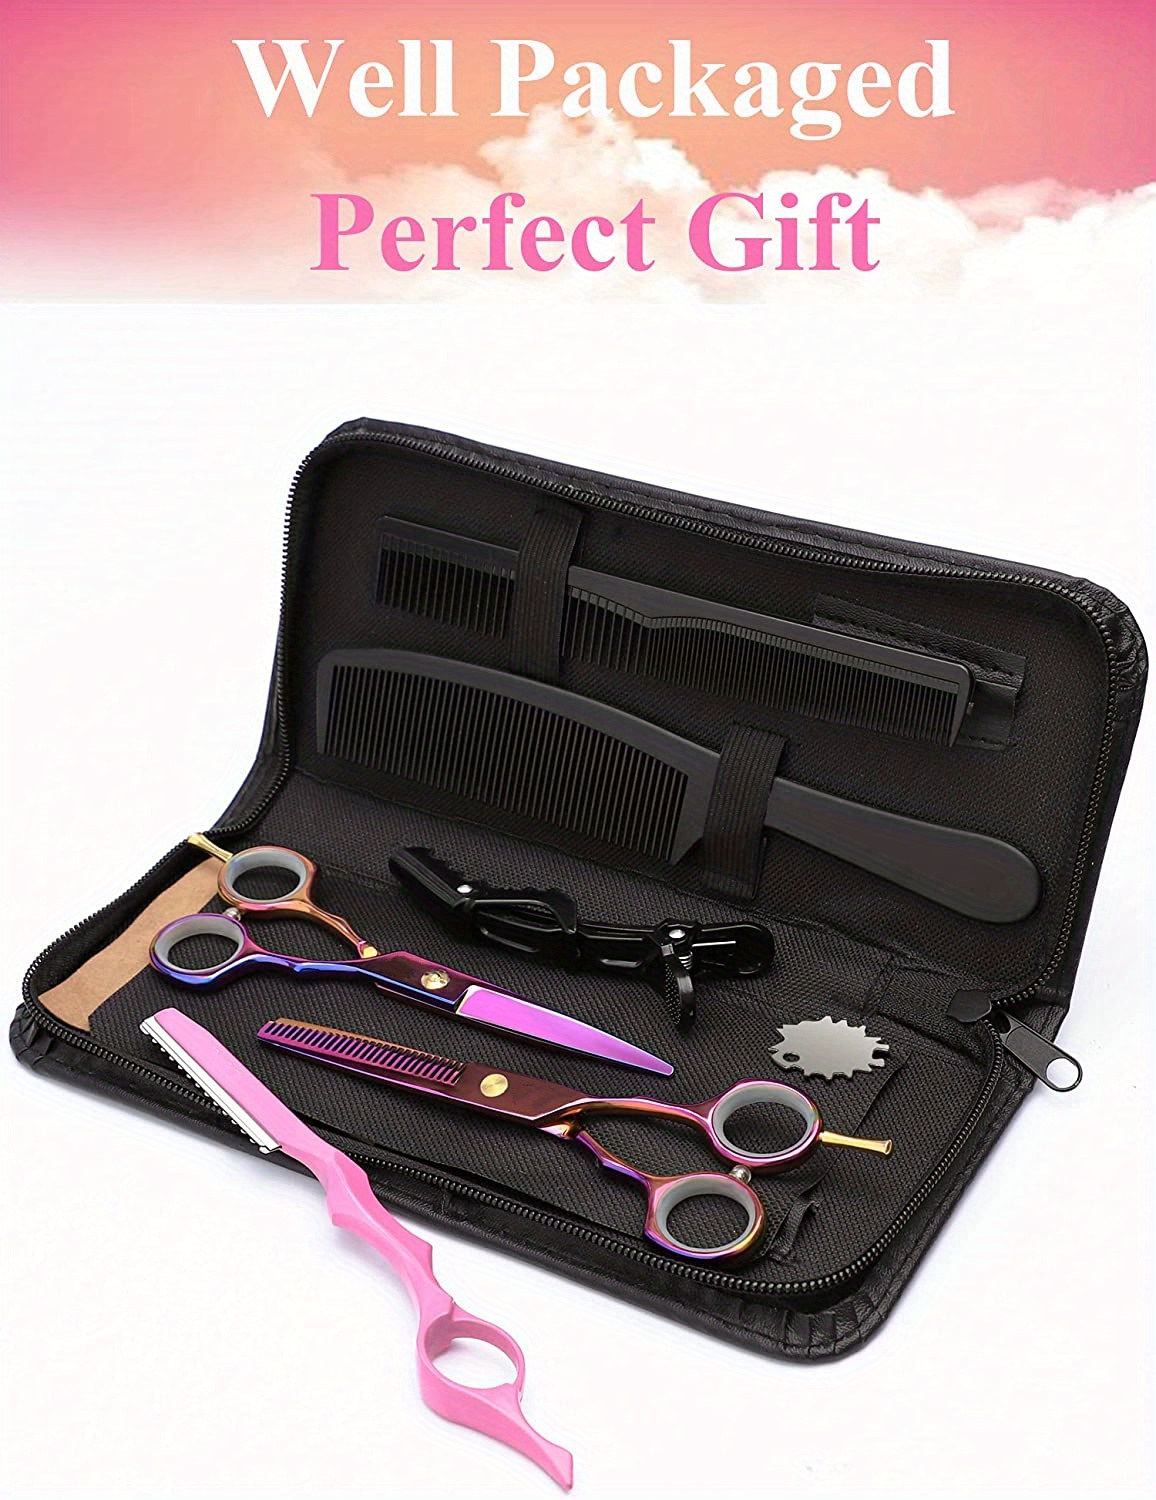 5 5 inch purple hair cutting scissors set with razor pu leather scissors case barber hair cutting shears hair thinning texturizing shears for professional hairdresser or home use multi colored details 6